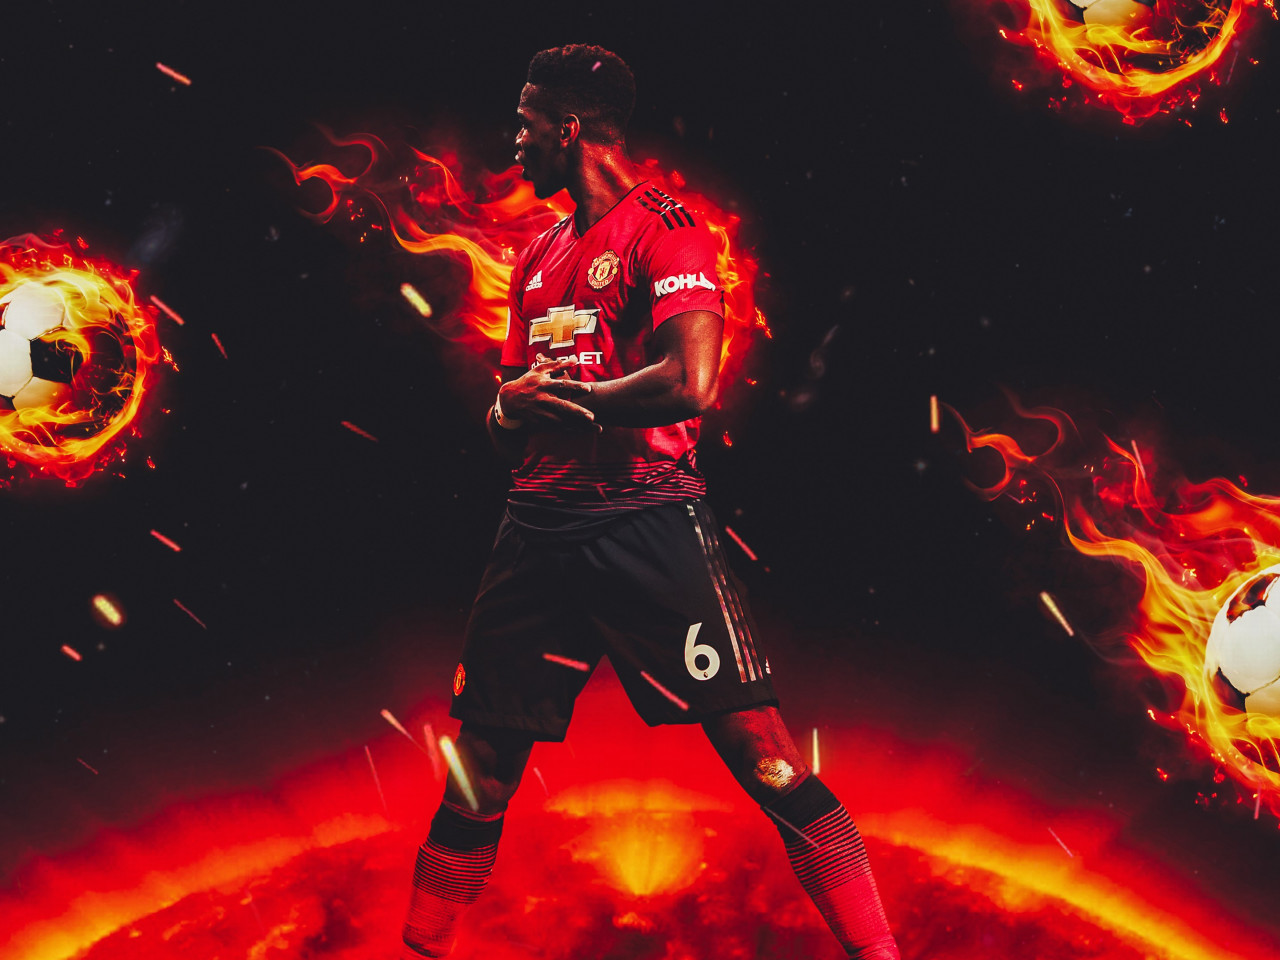 Paul Pogba for Manchester United wallpaper 1280x960